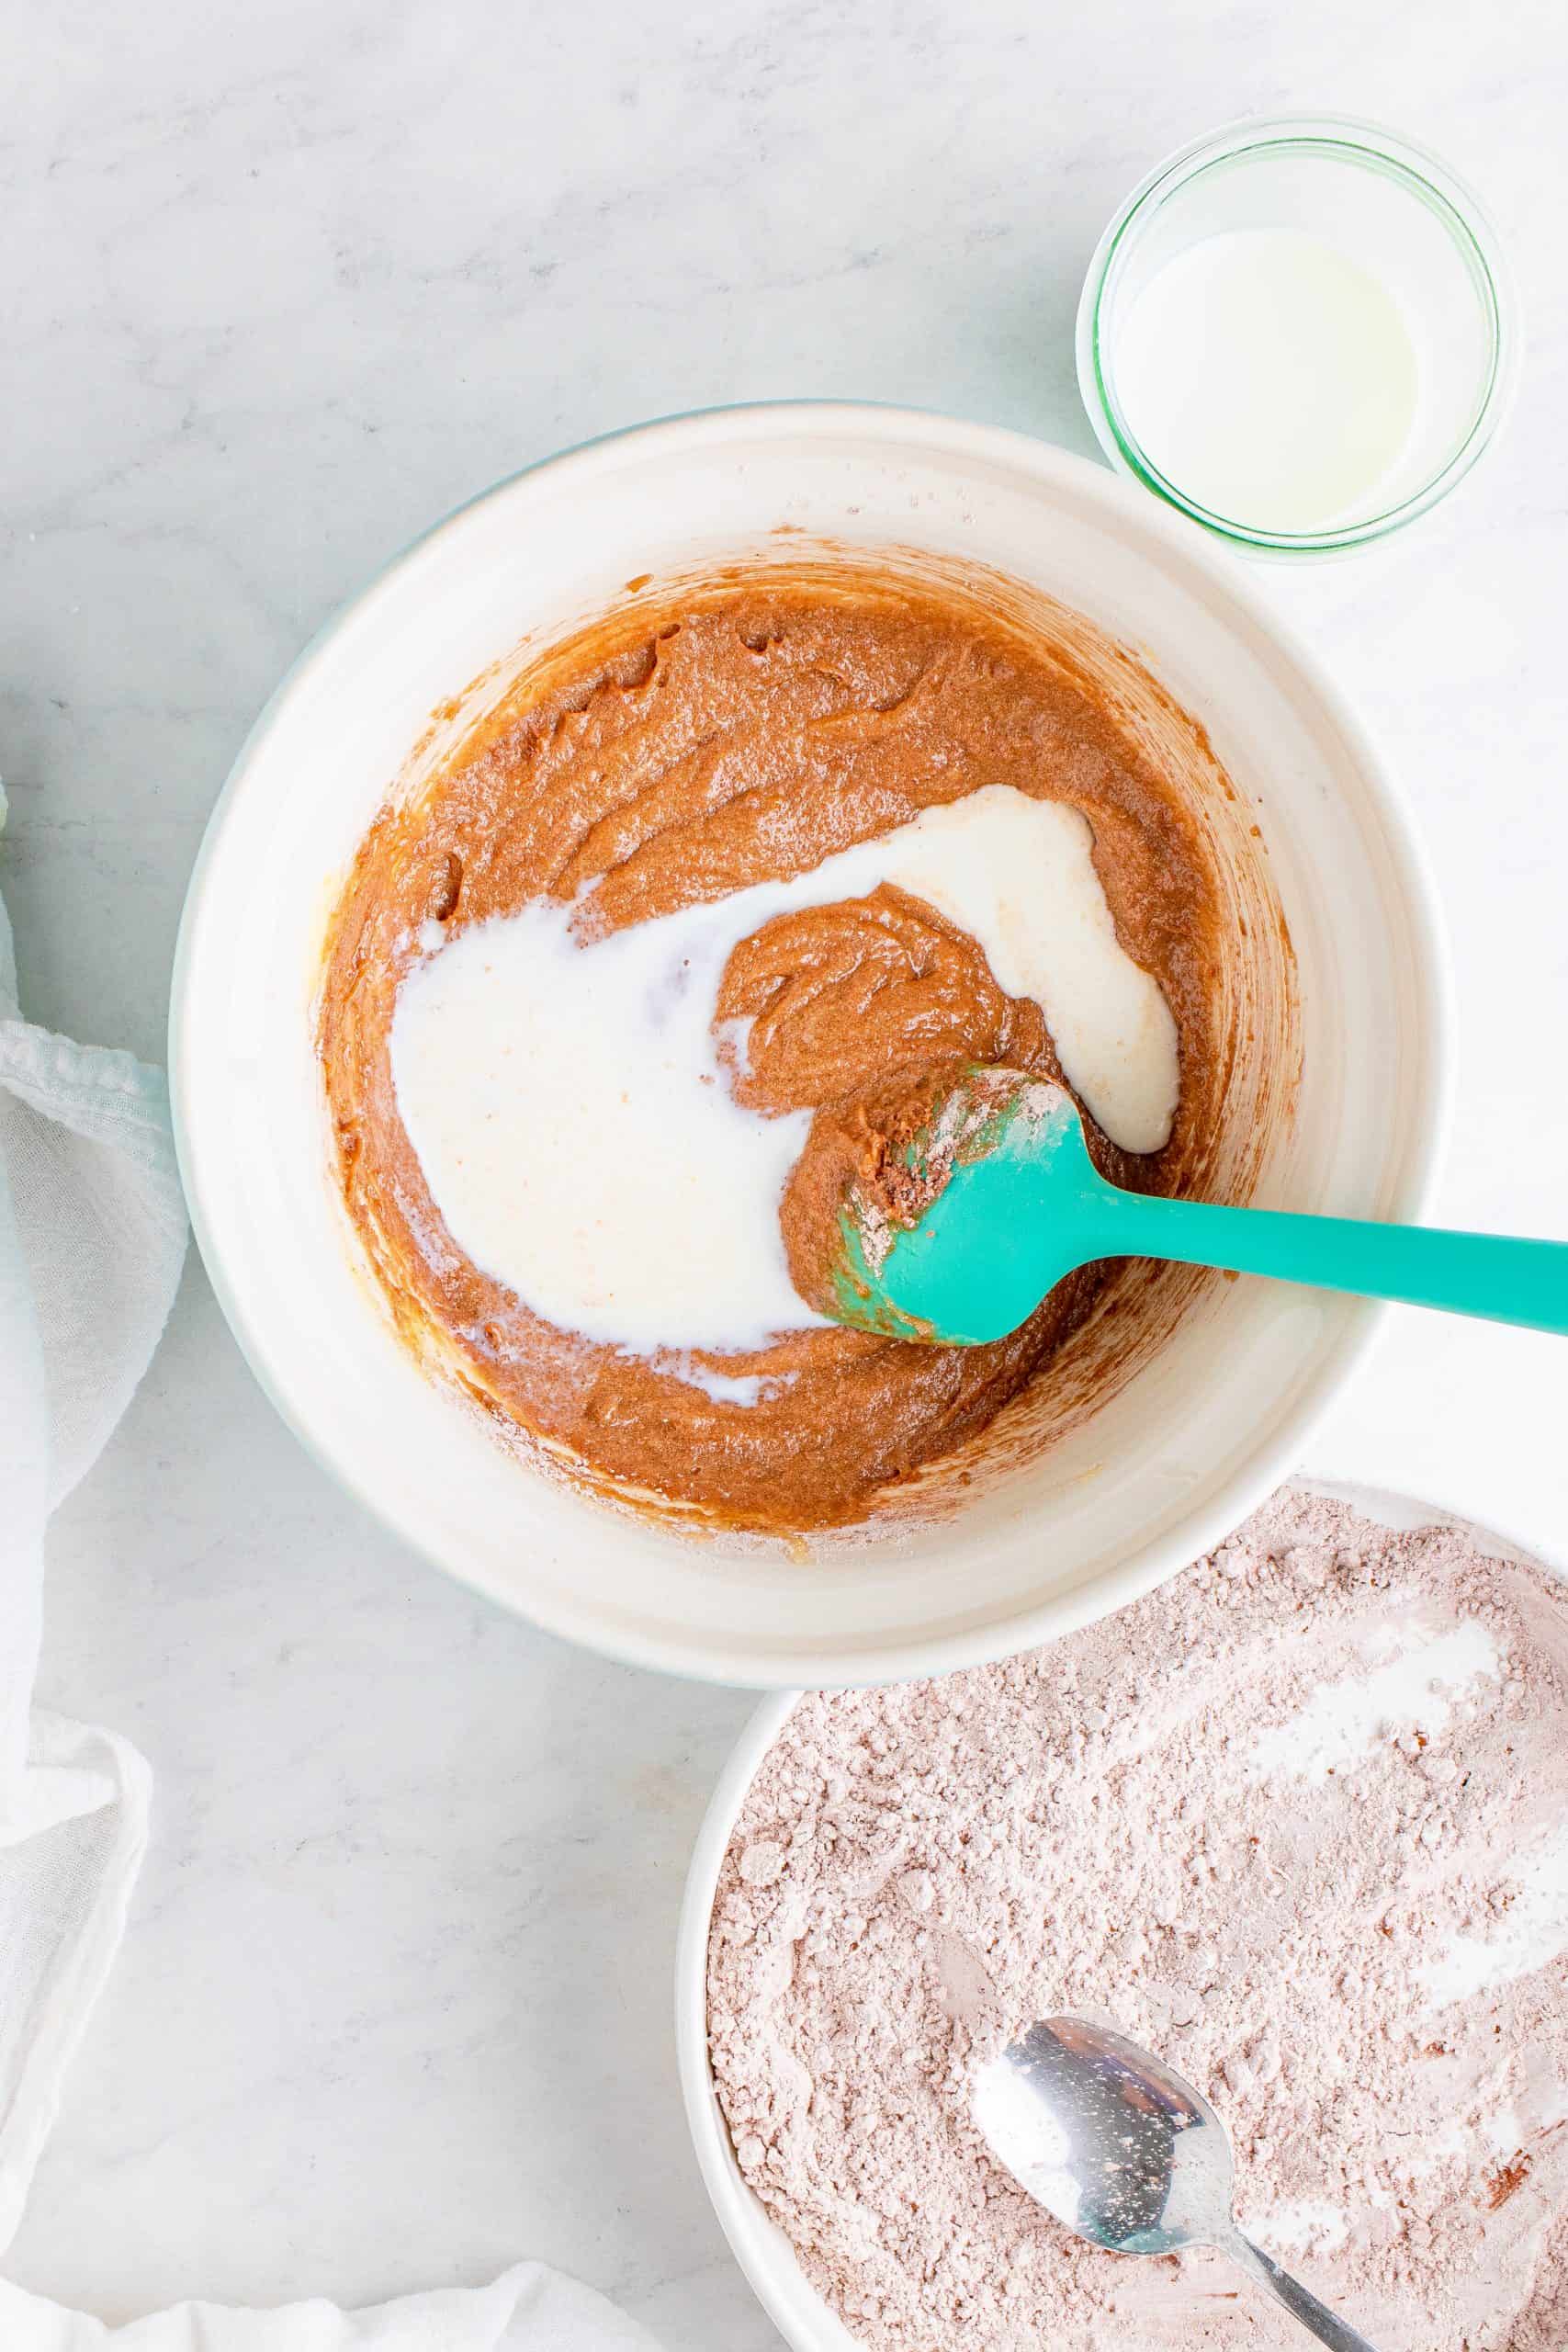 buttermilk added to cocoa batter mixture in a white bowl with a turquoise colored spoon.